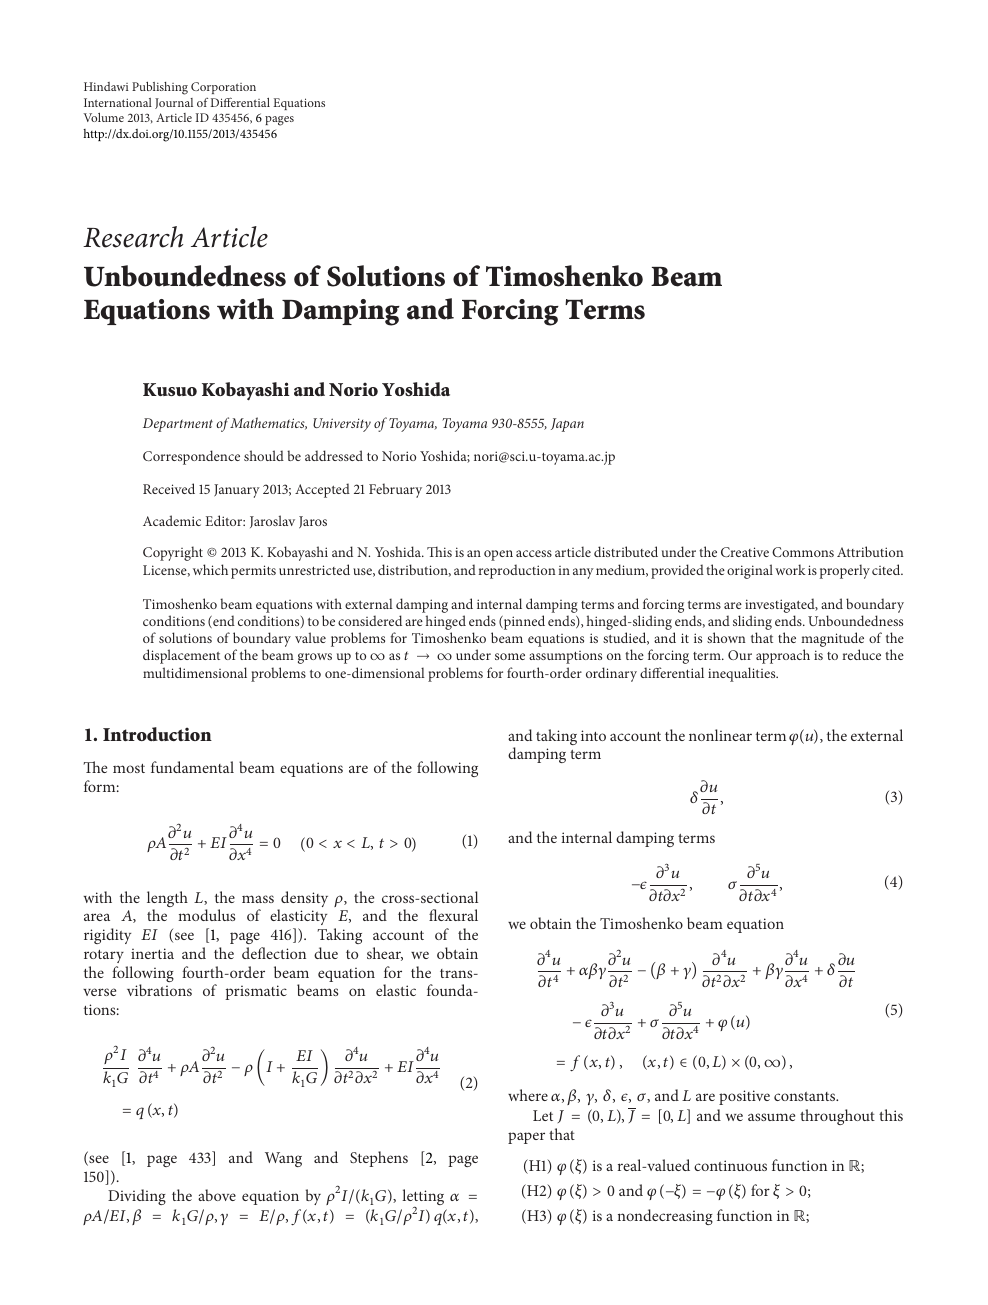 Unboundedness Of Solutions Of Timoshenko Beam Equations With Damping And Forcing Terms Topic Of Research Paper In Mathematics Download Scholarly Article Pdf And Read For Free On Cyberleninka Open Science Hub